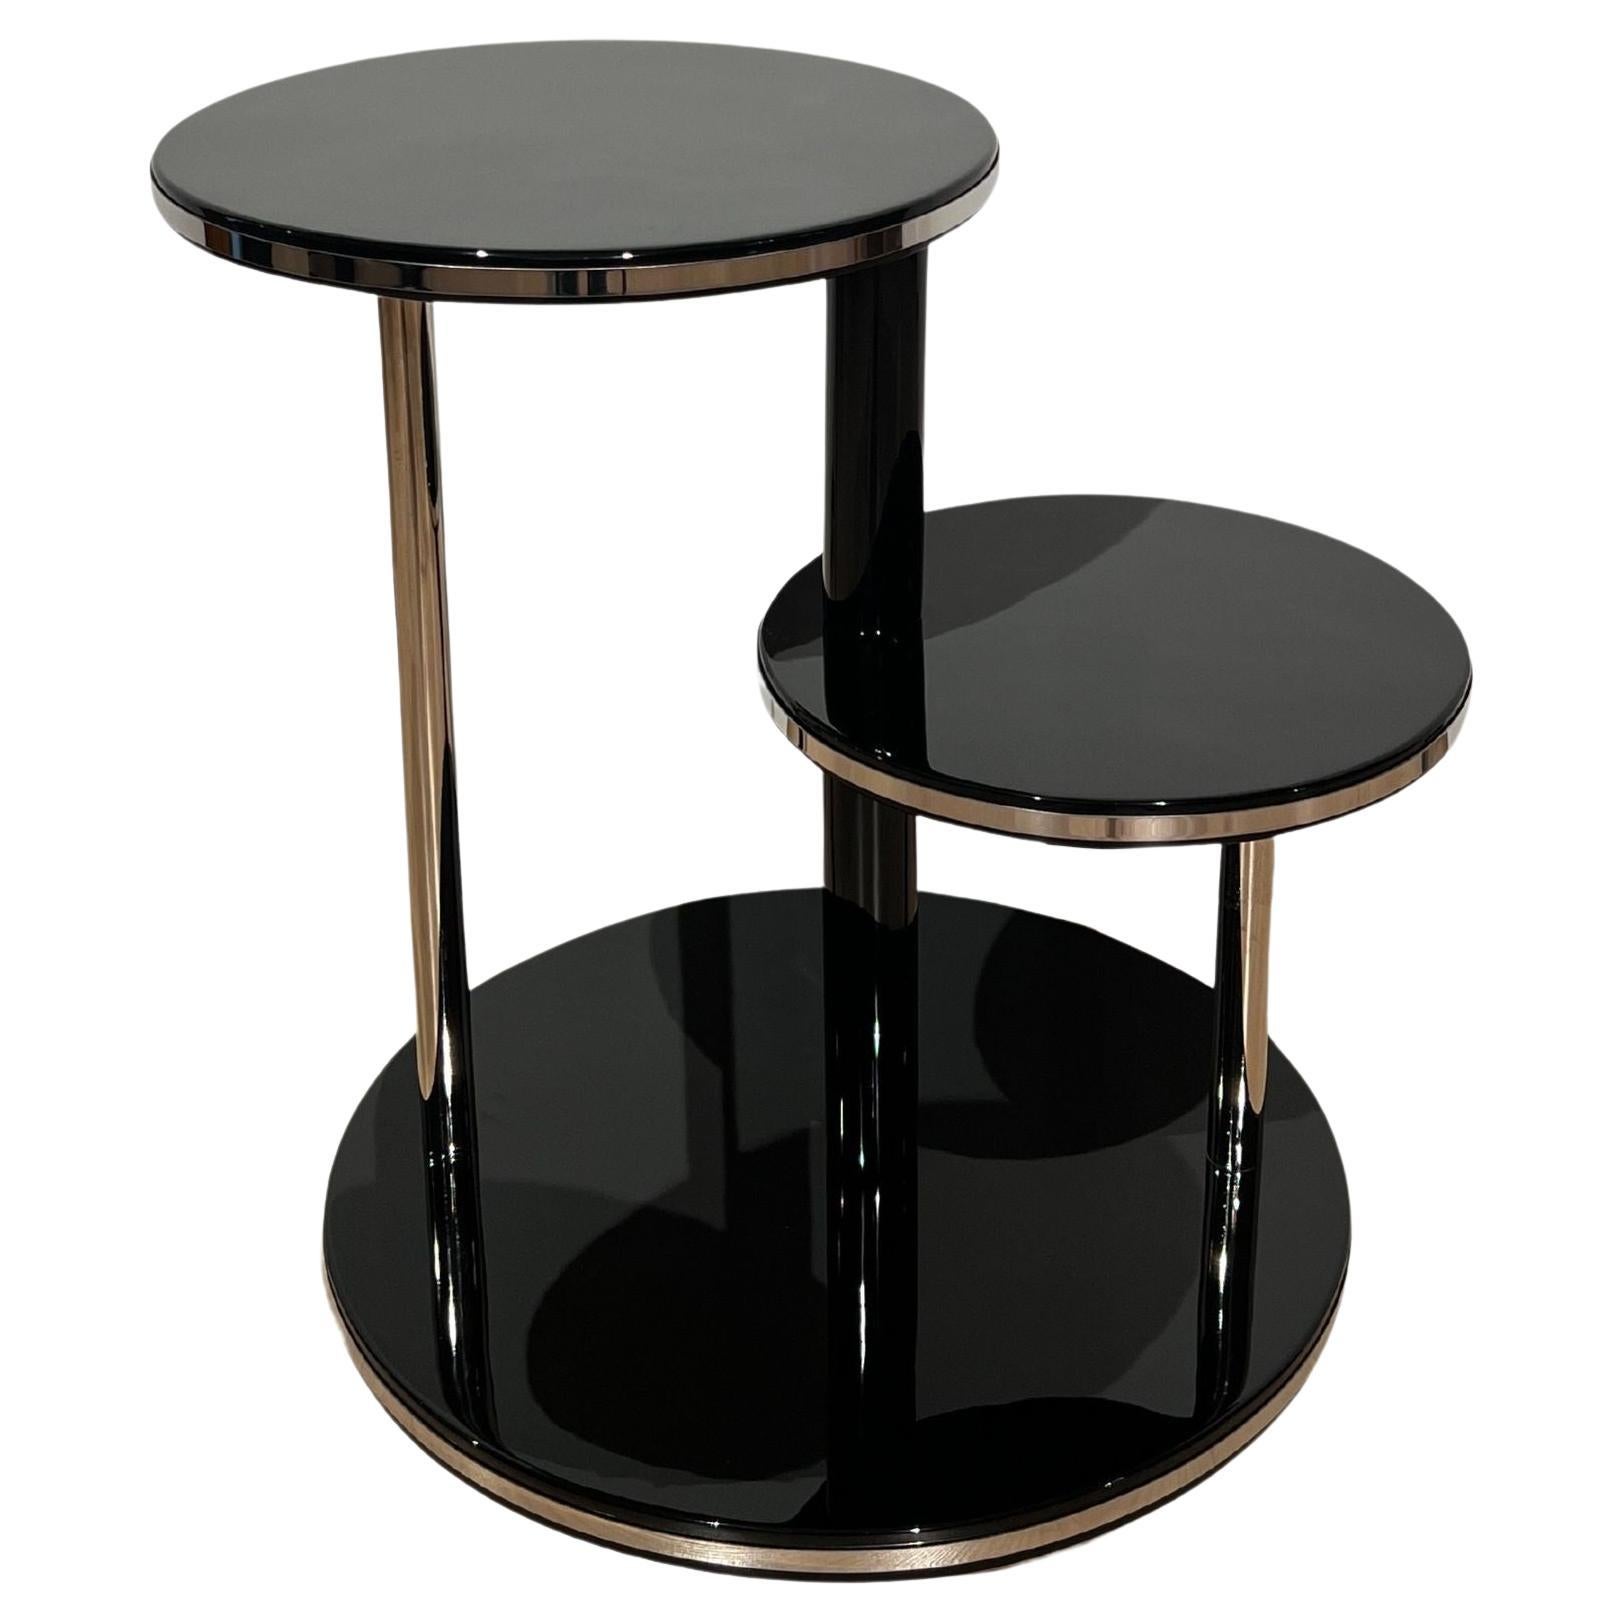 Art Deco Round Side Table, Black Lacquer, Chrome, Metal Trims, France circa 1930 For Sale